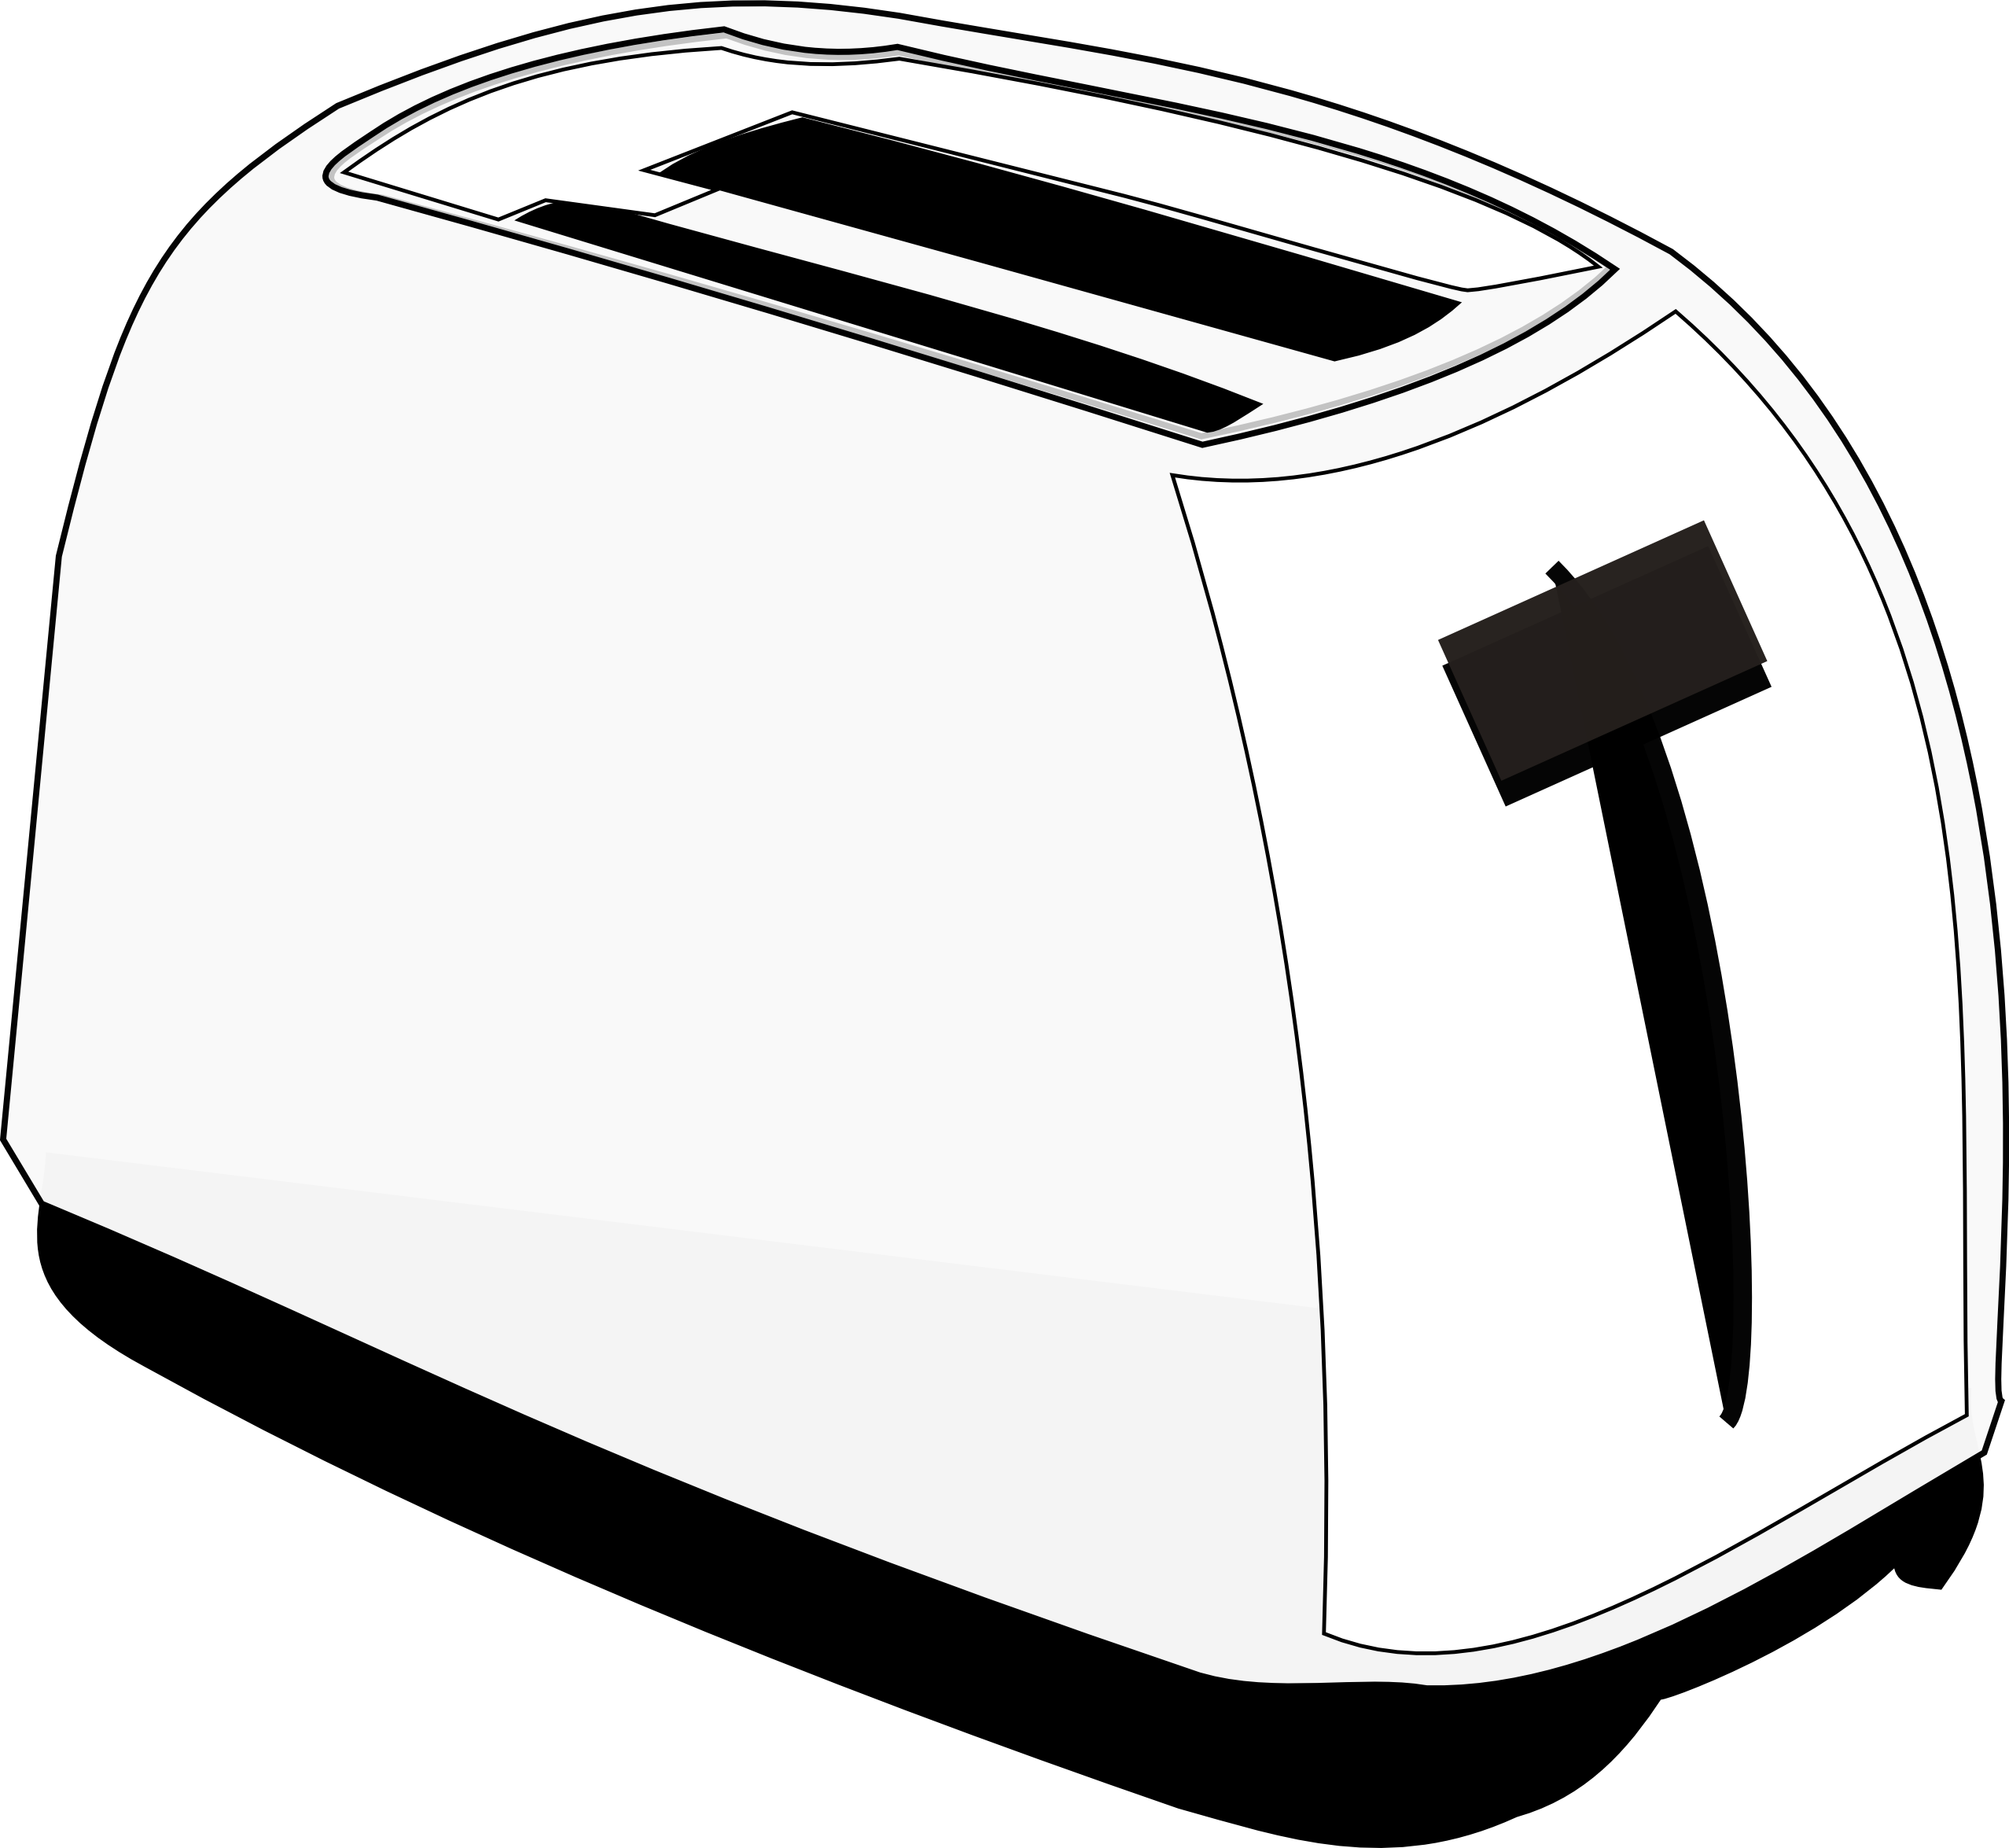 Toaster Clipart | Clipart Panda - Free Clipart Images